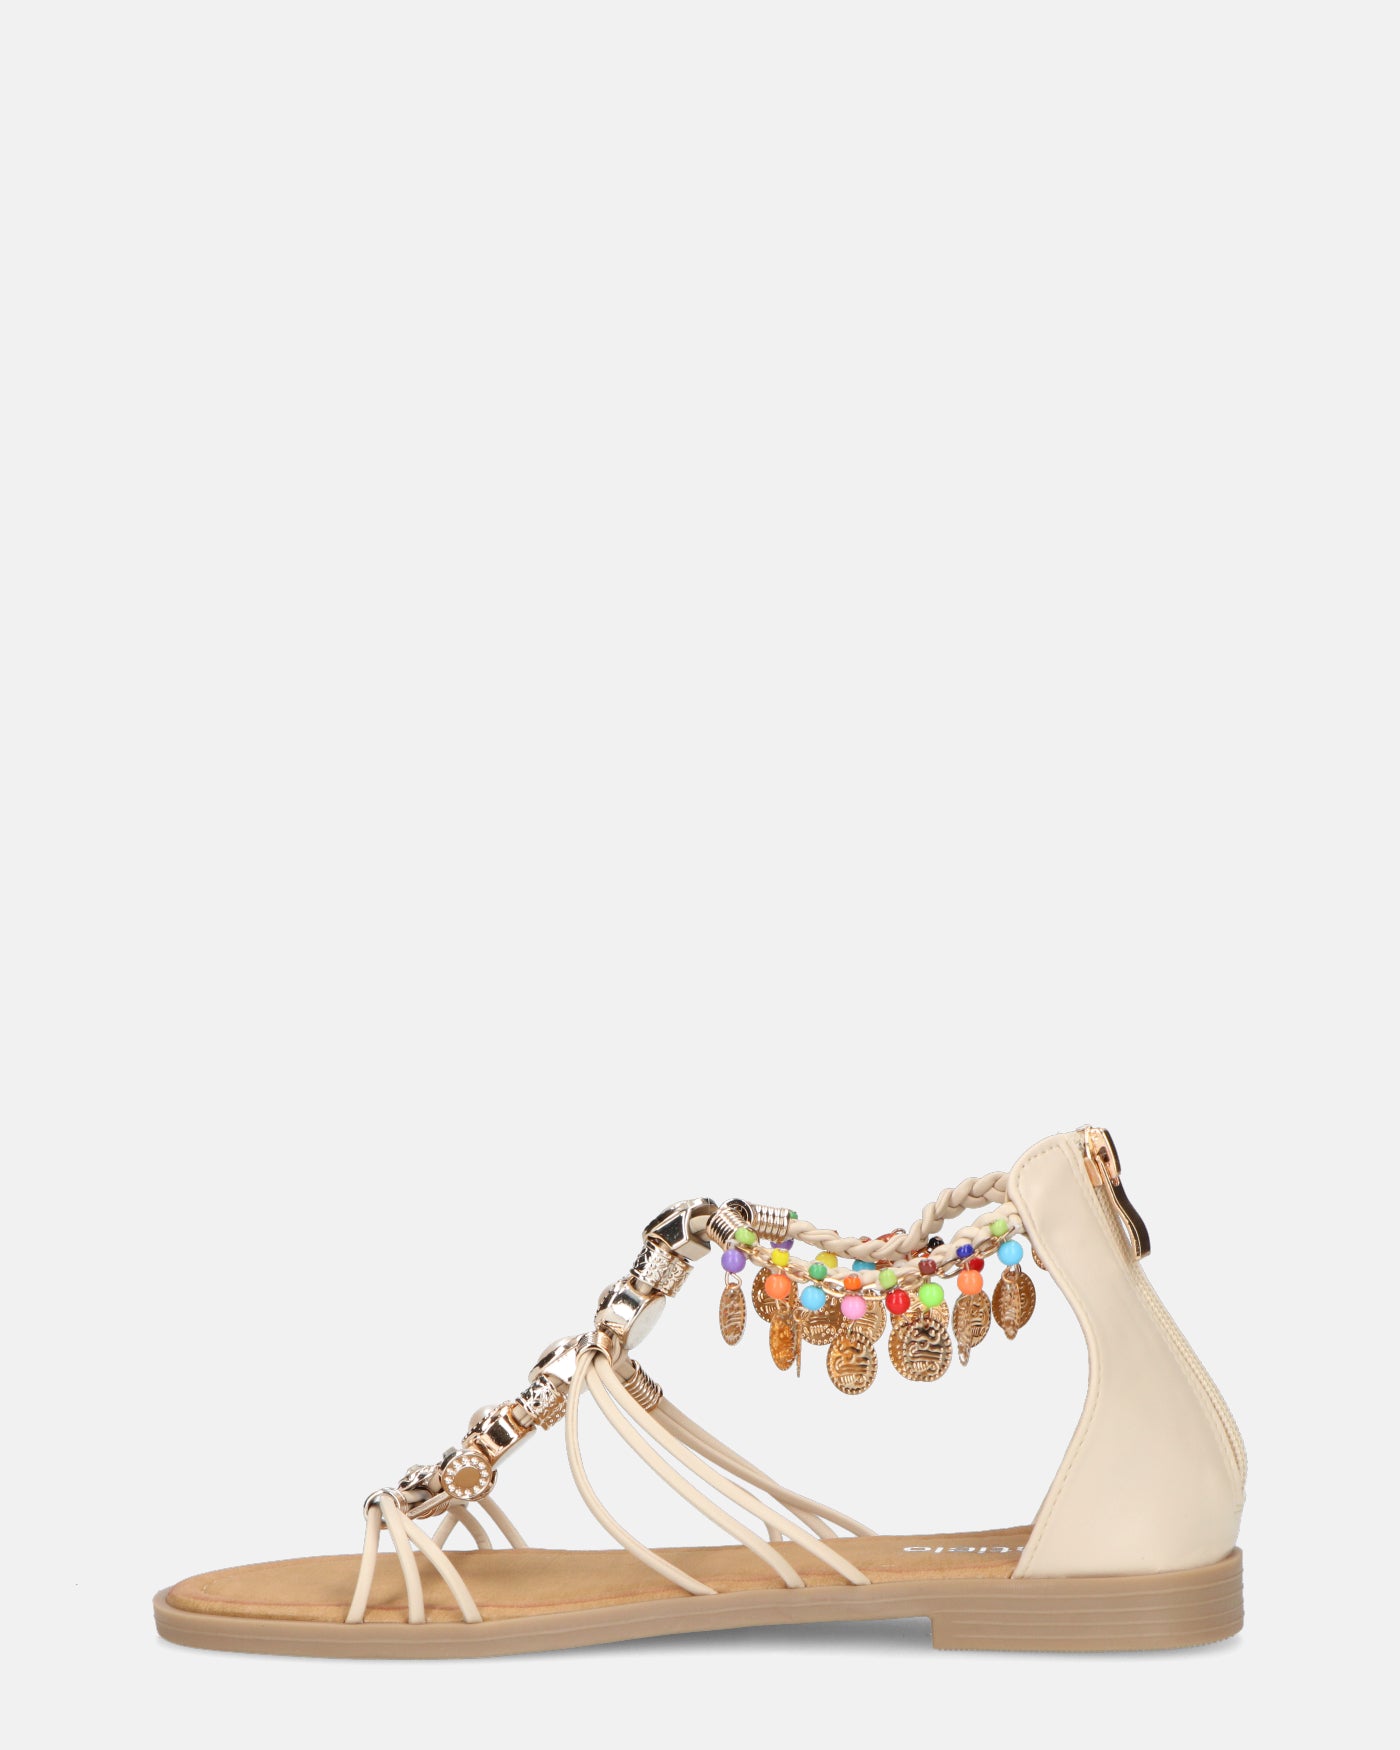 PAULA - beige open sandals with back zip and colored gems